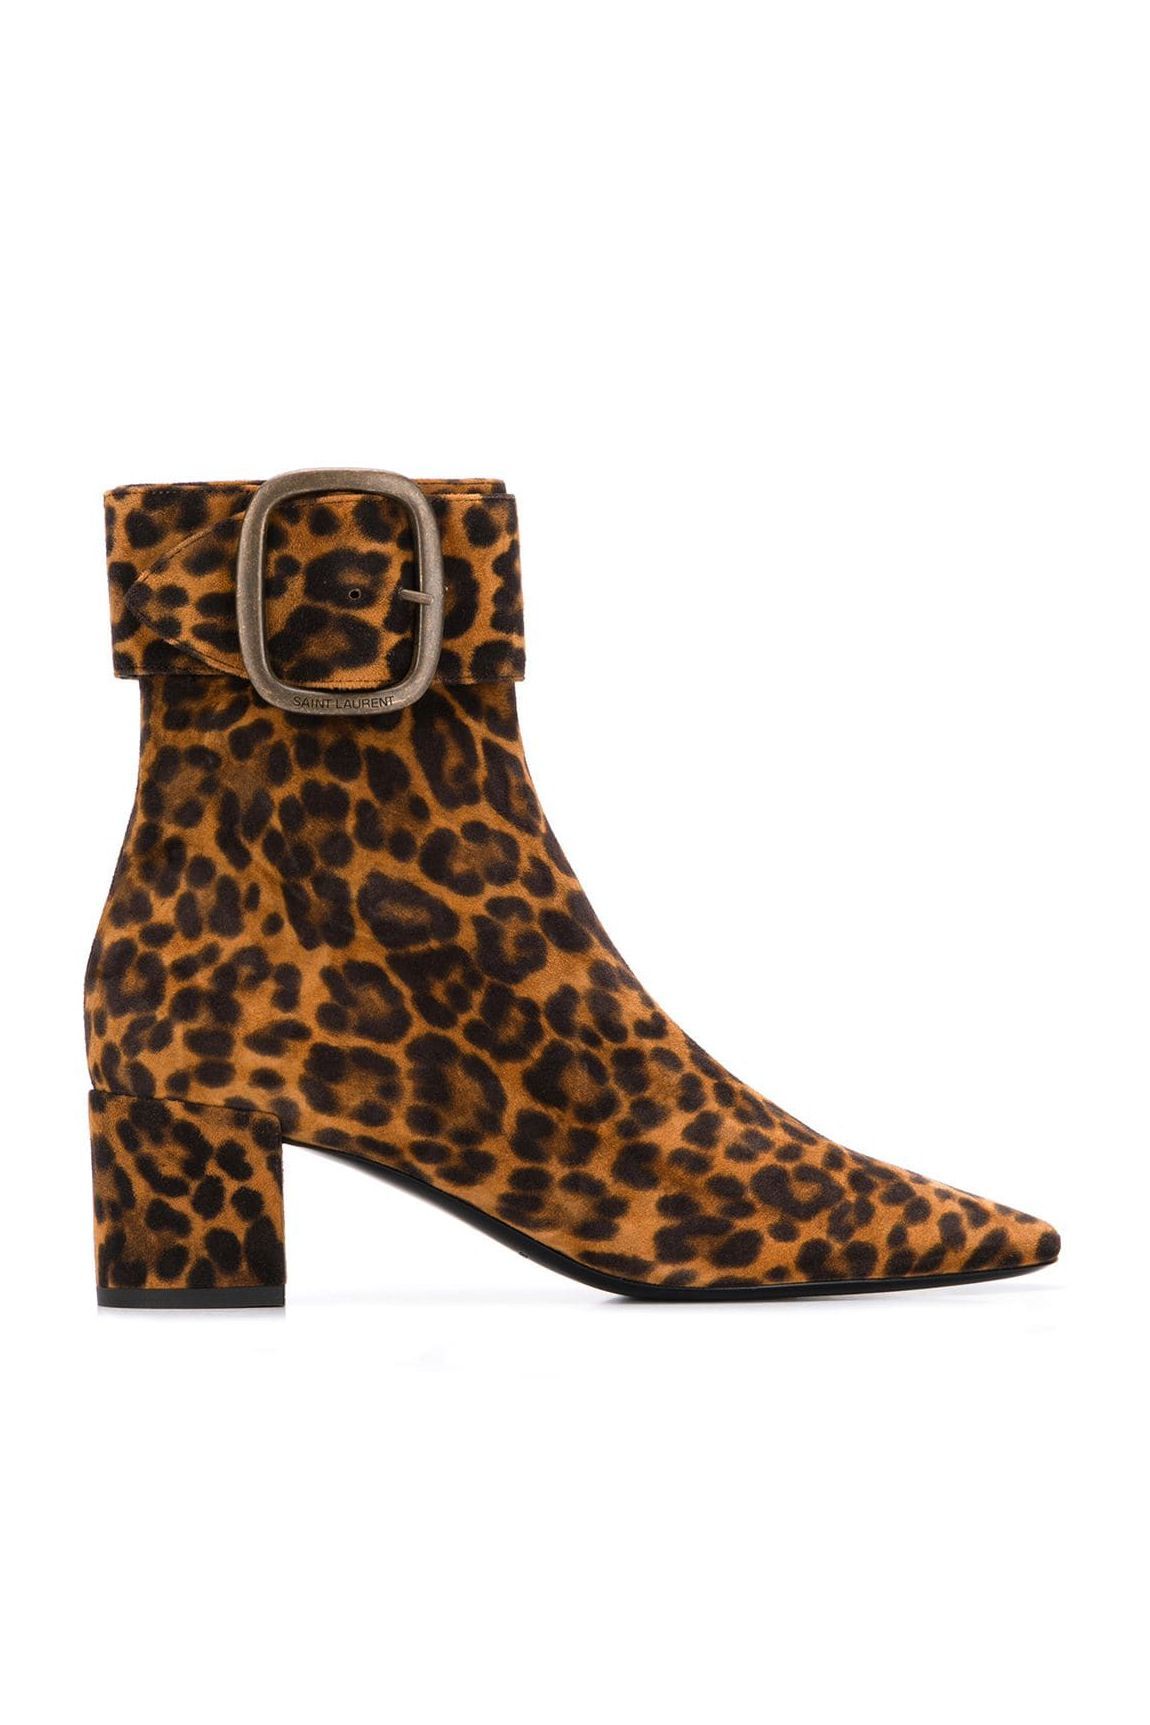 The Best Animal Print Boots of 2020 